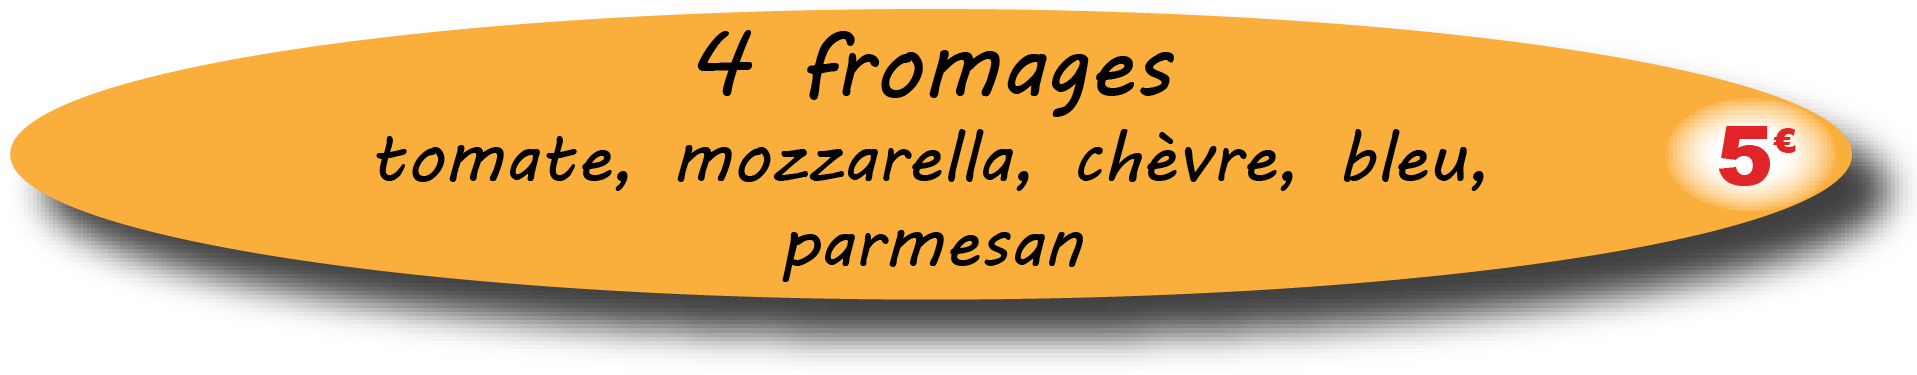 4 Fromages